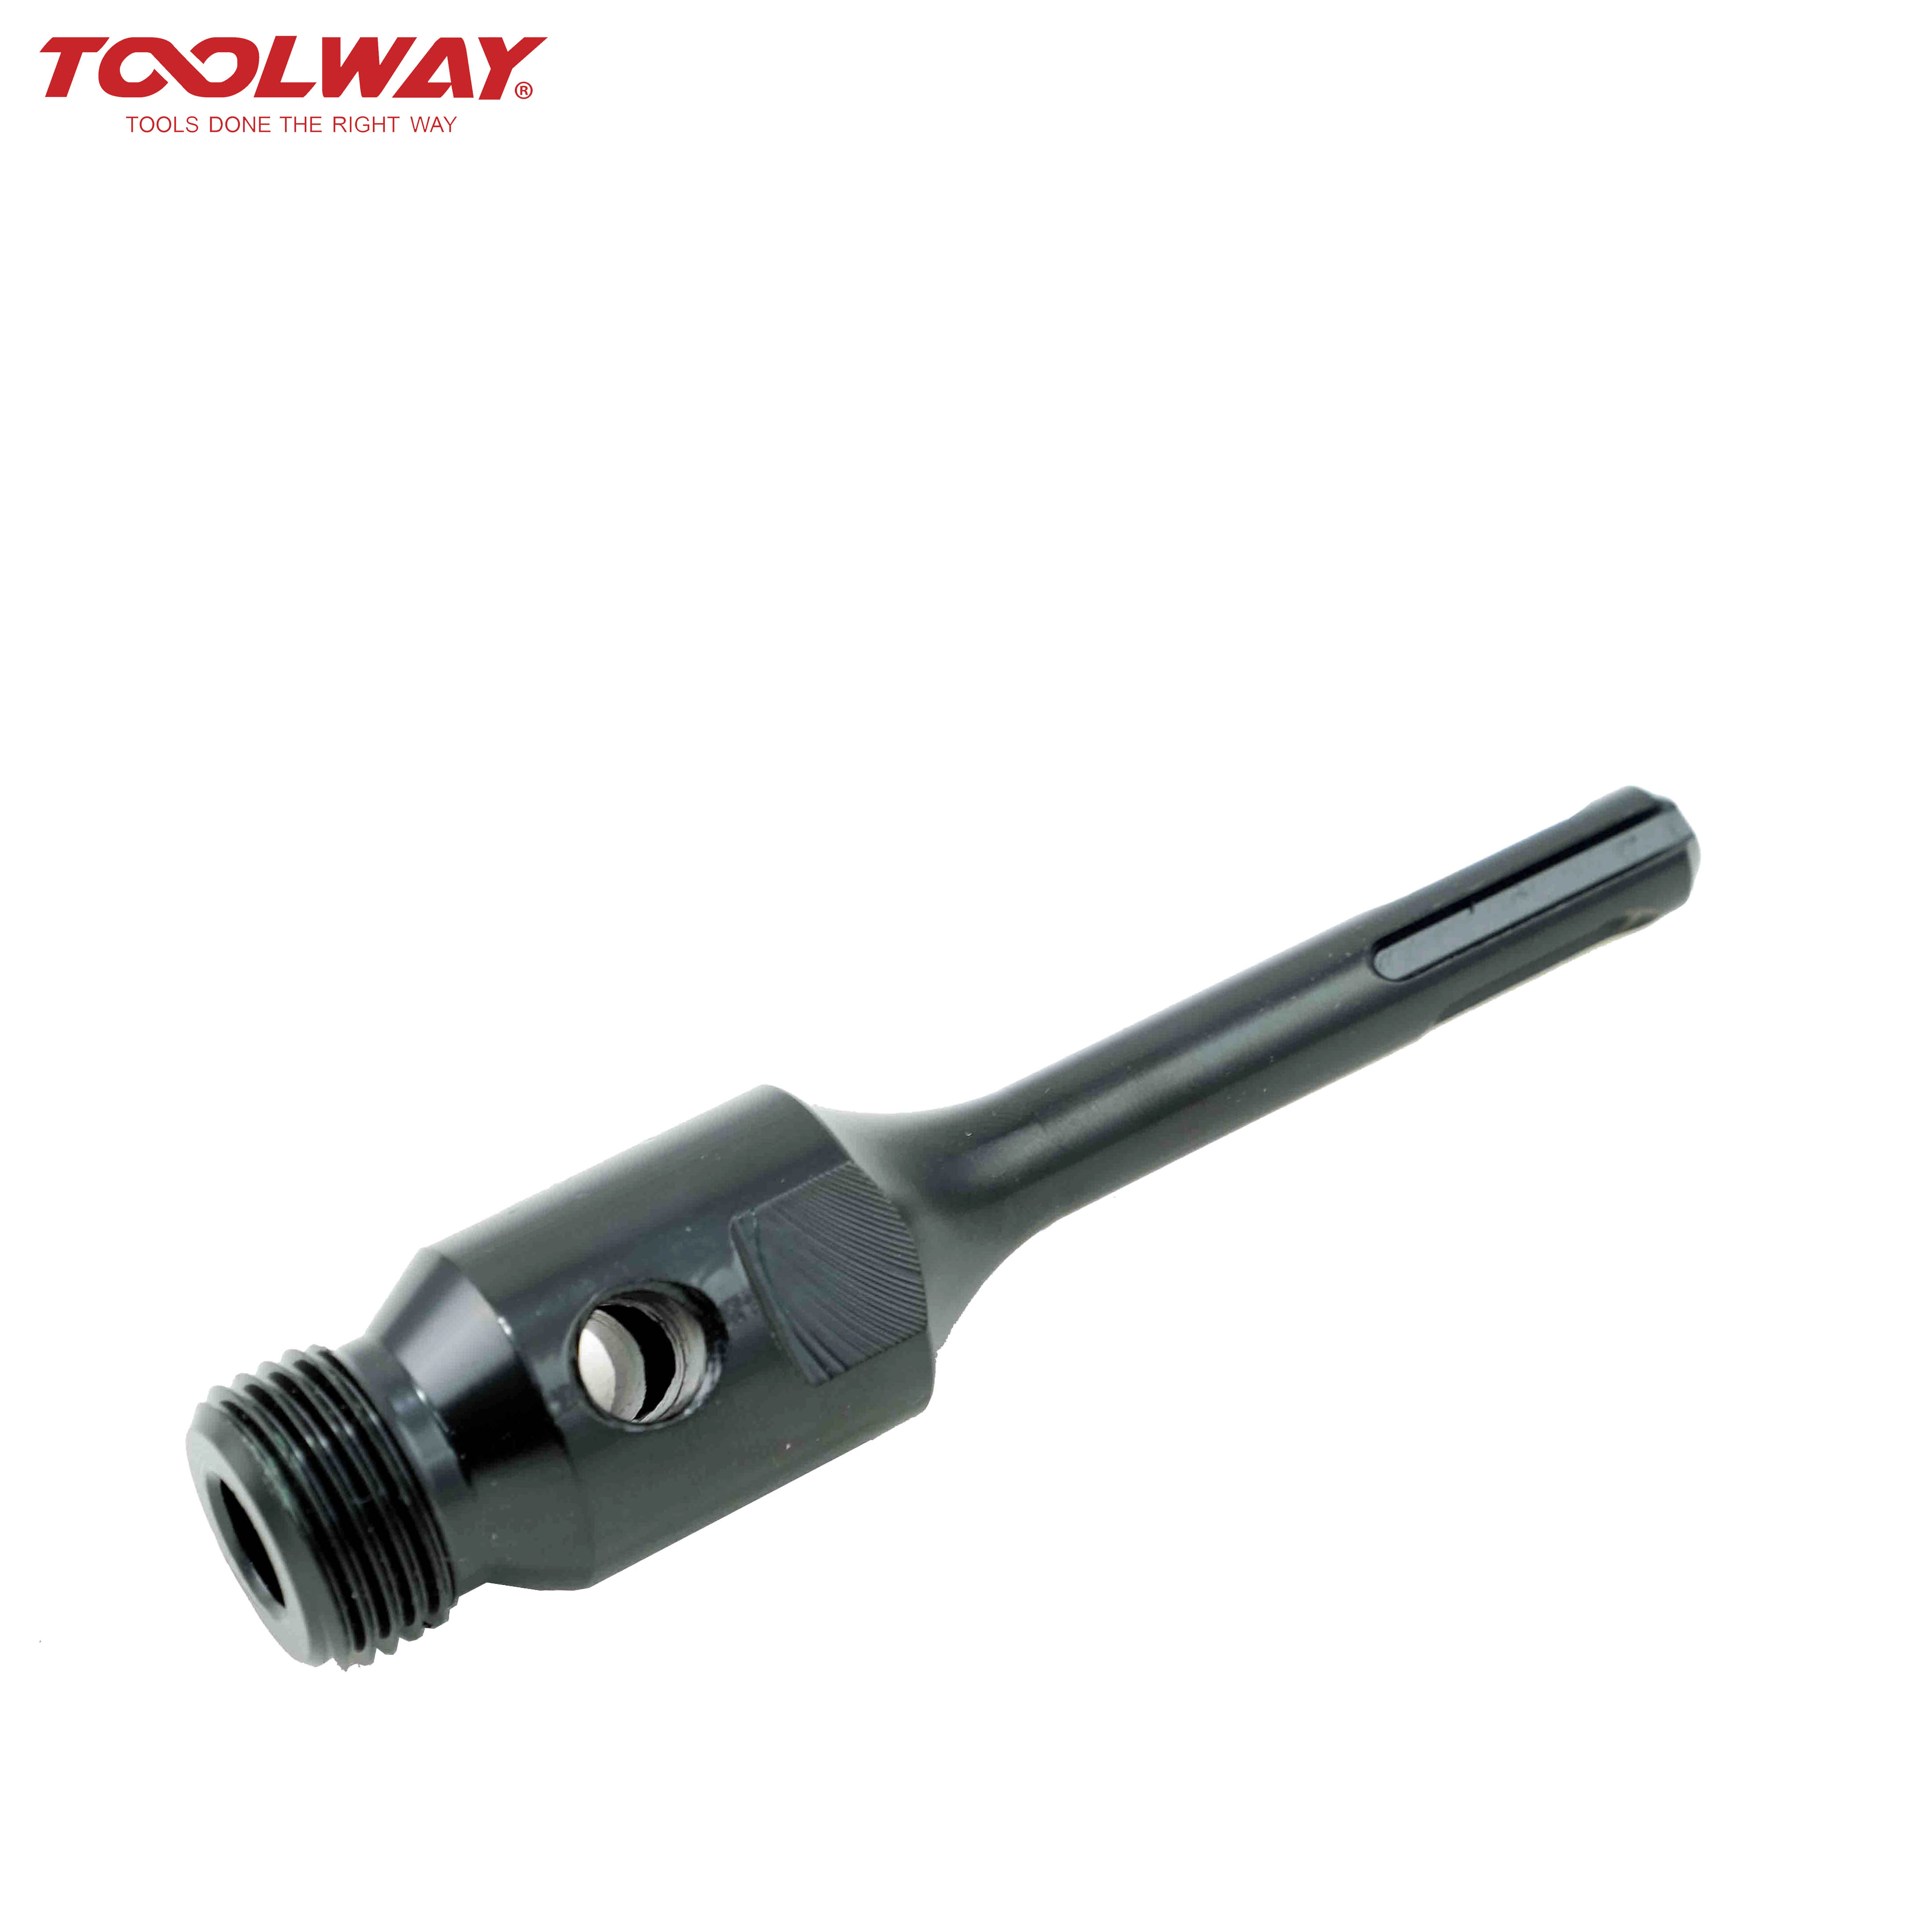 SDS Adaptor for Hole Saw And Drill Bit with M14